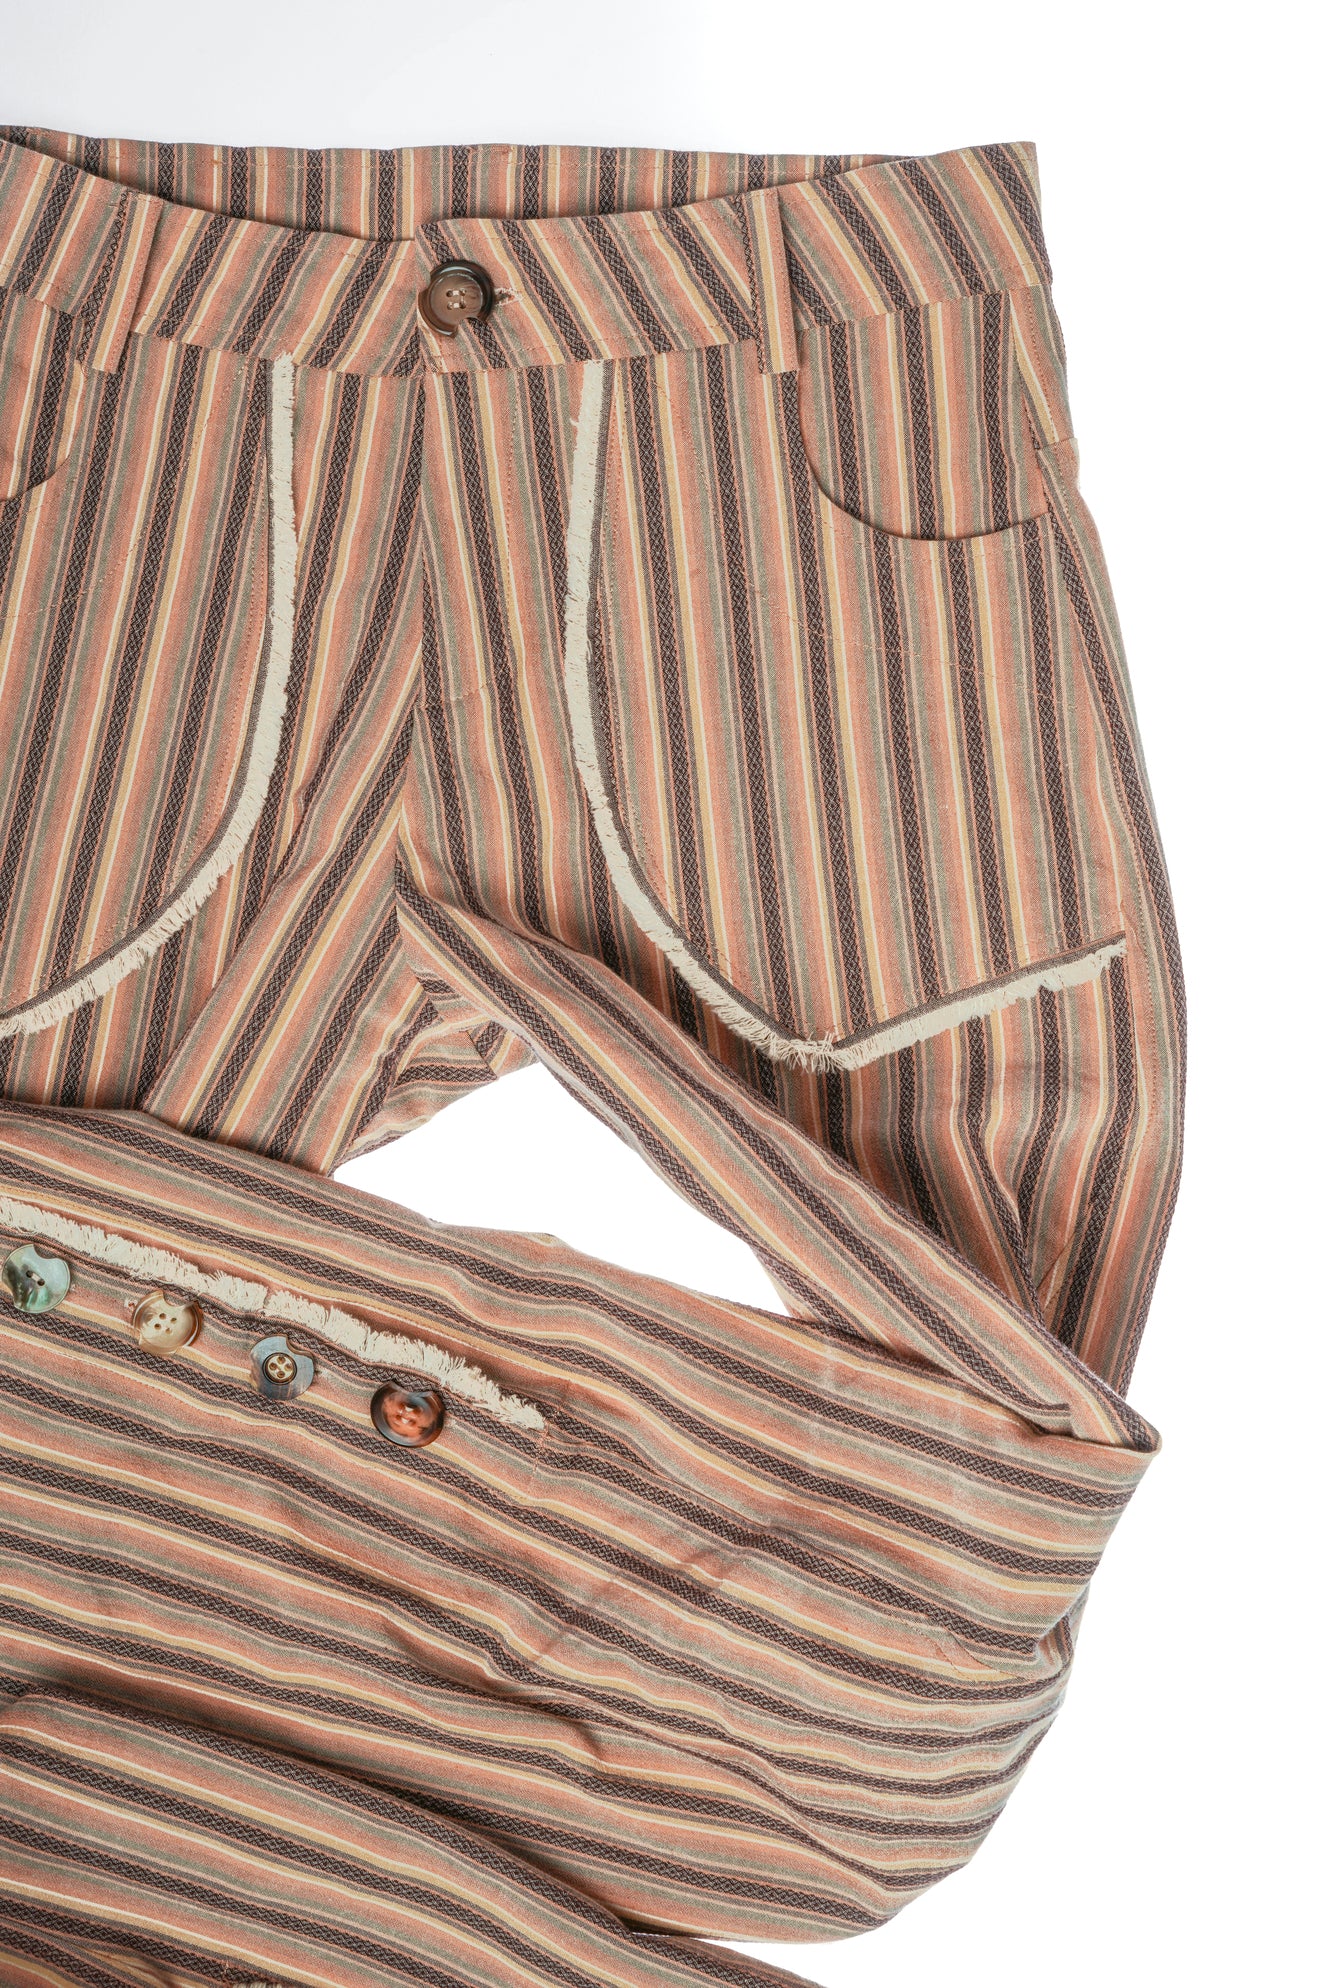 13 BUTTONS STRIPED TROUSERS (made to order)